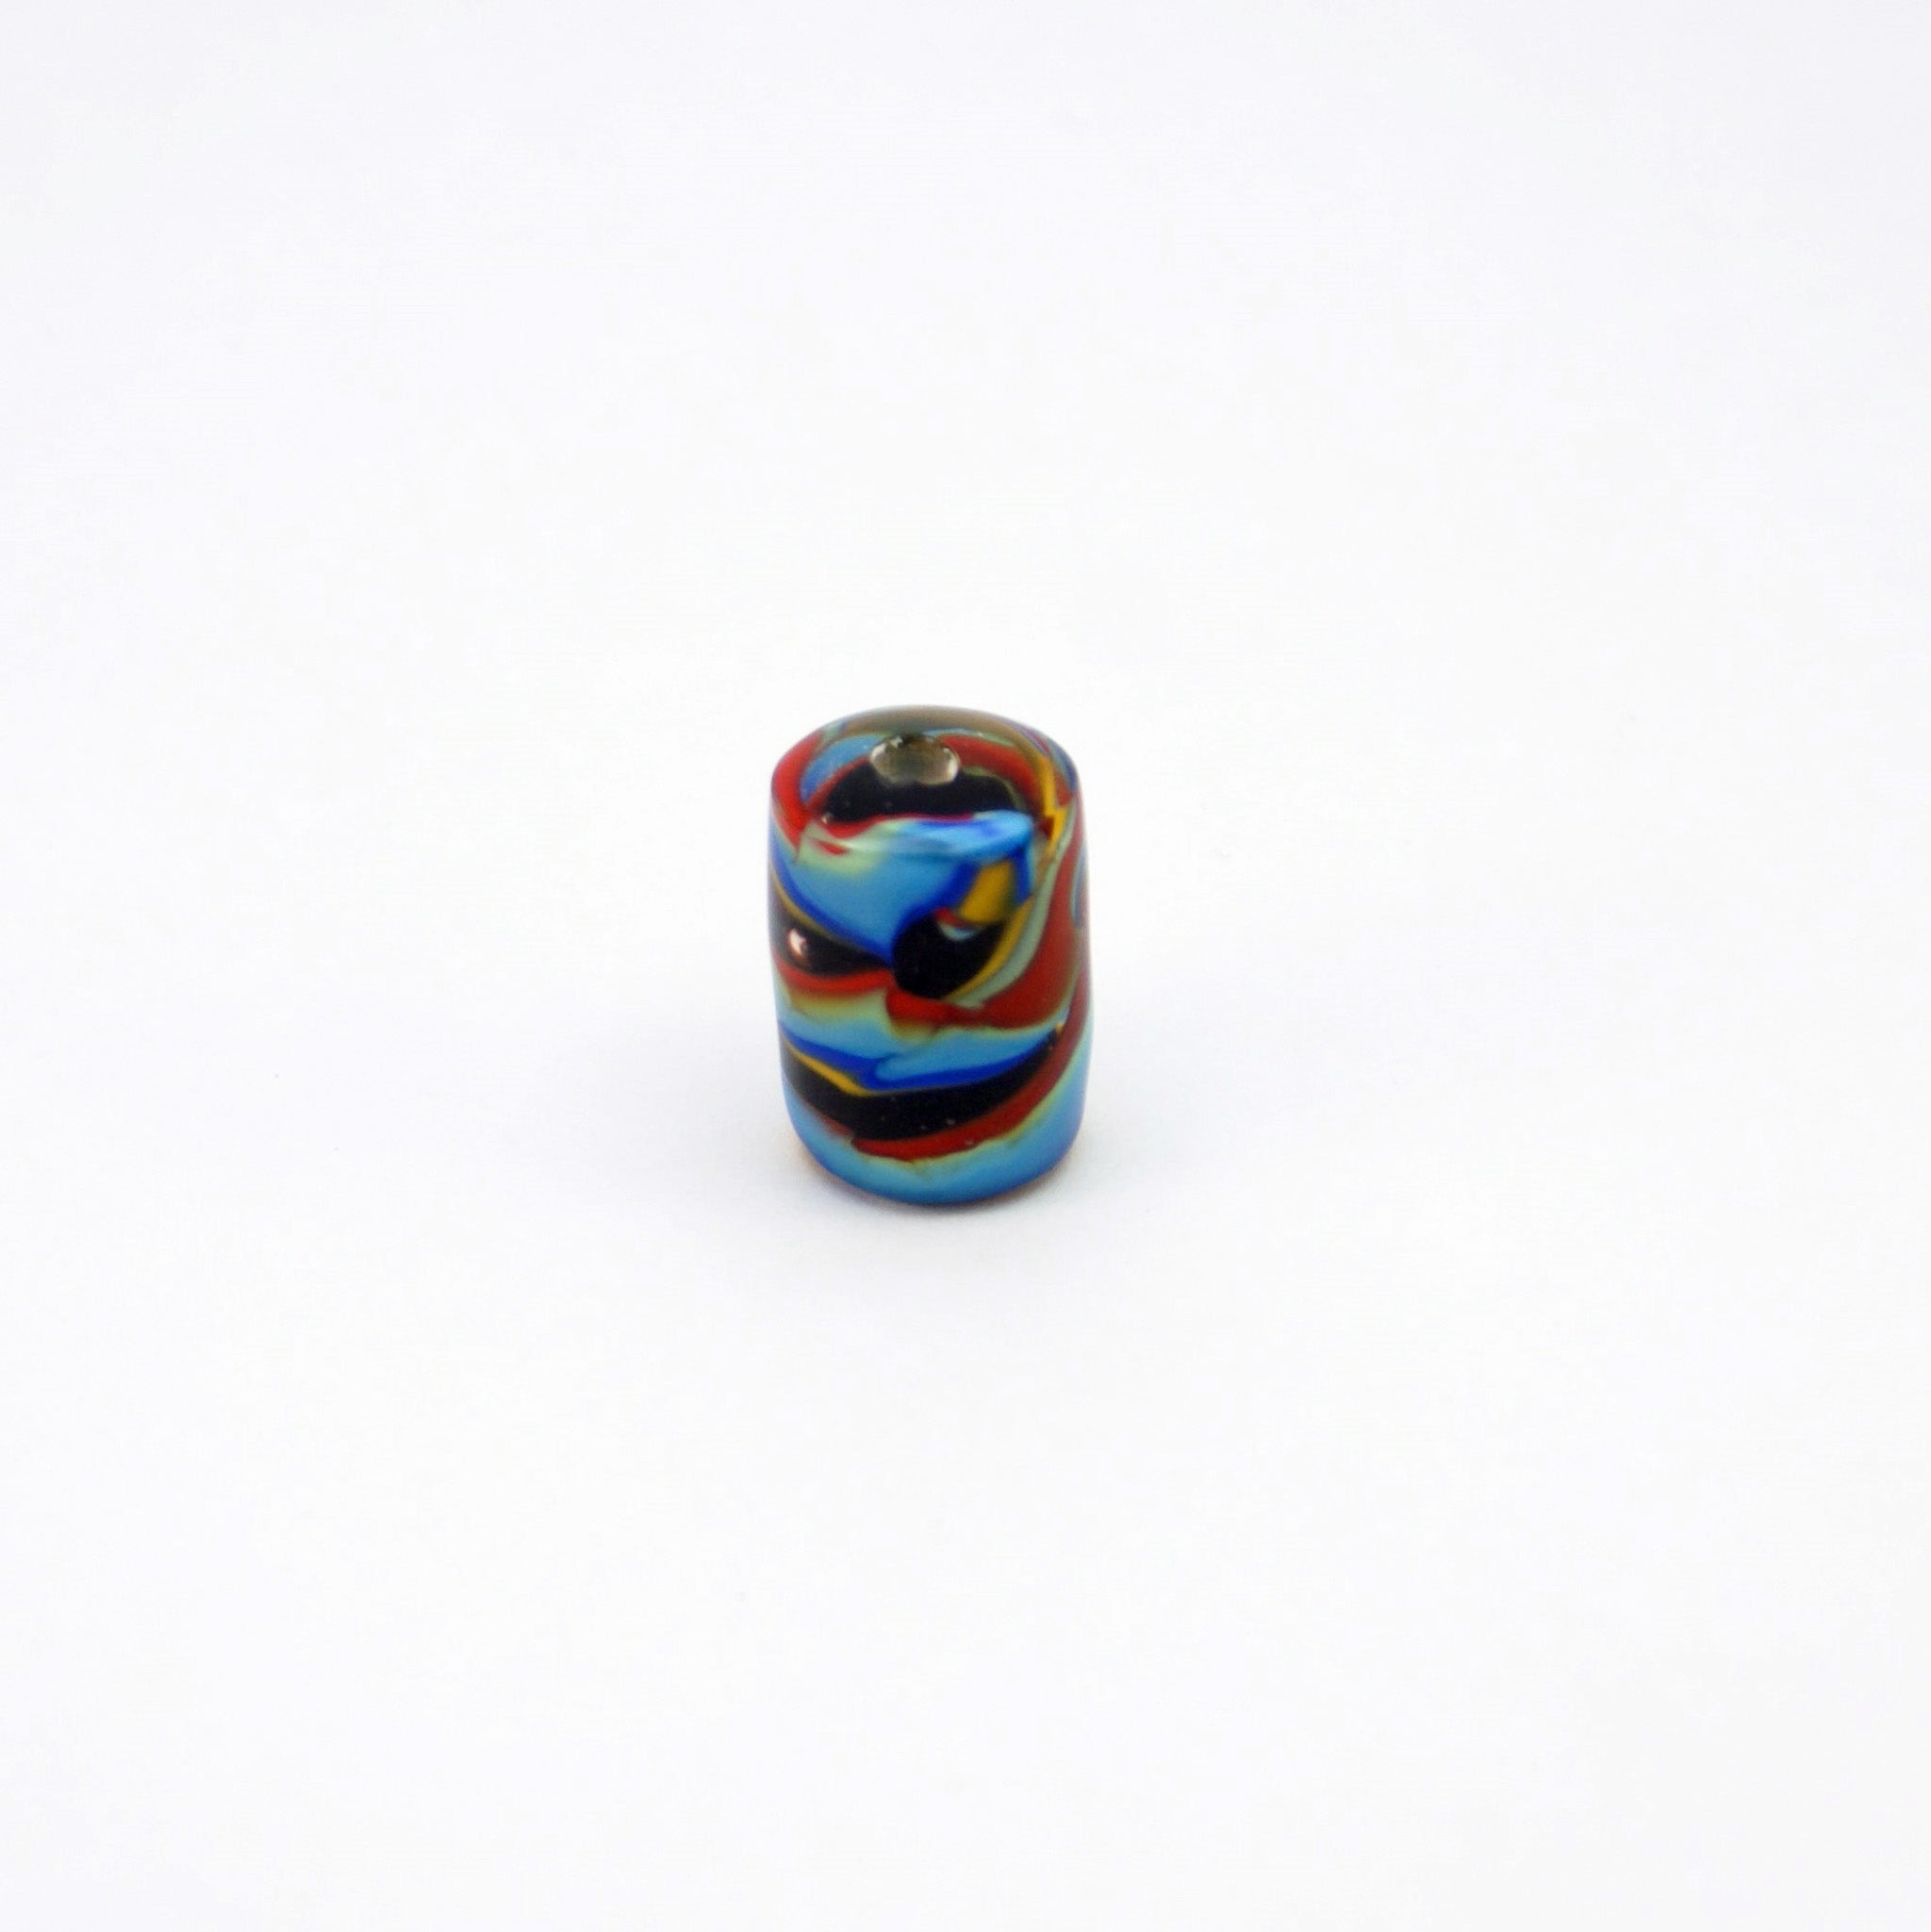 Lampwork glass tube bead on end with bright colors on black core